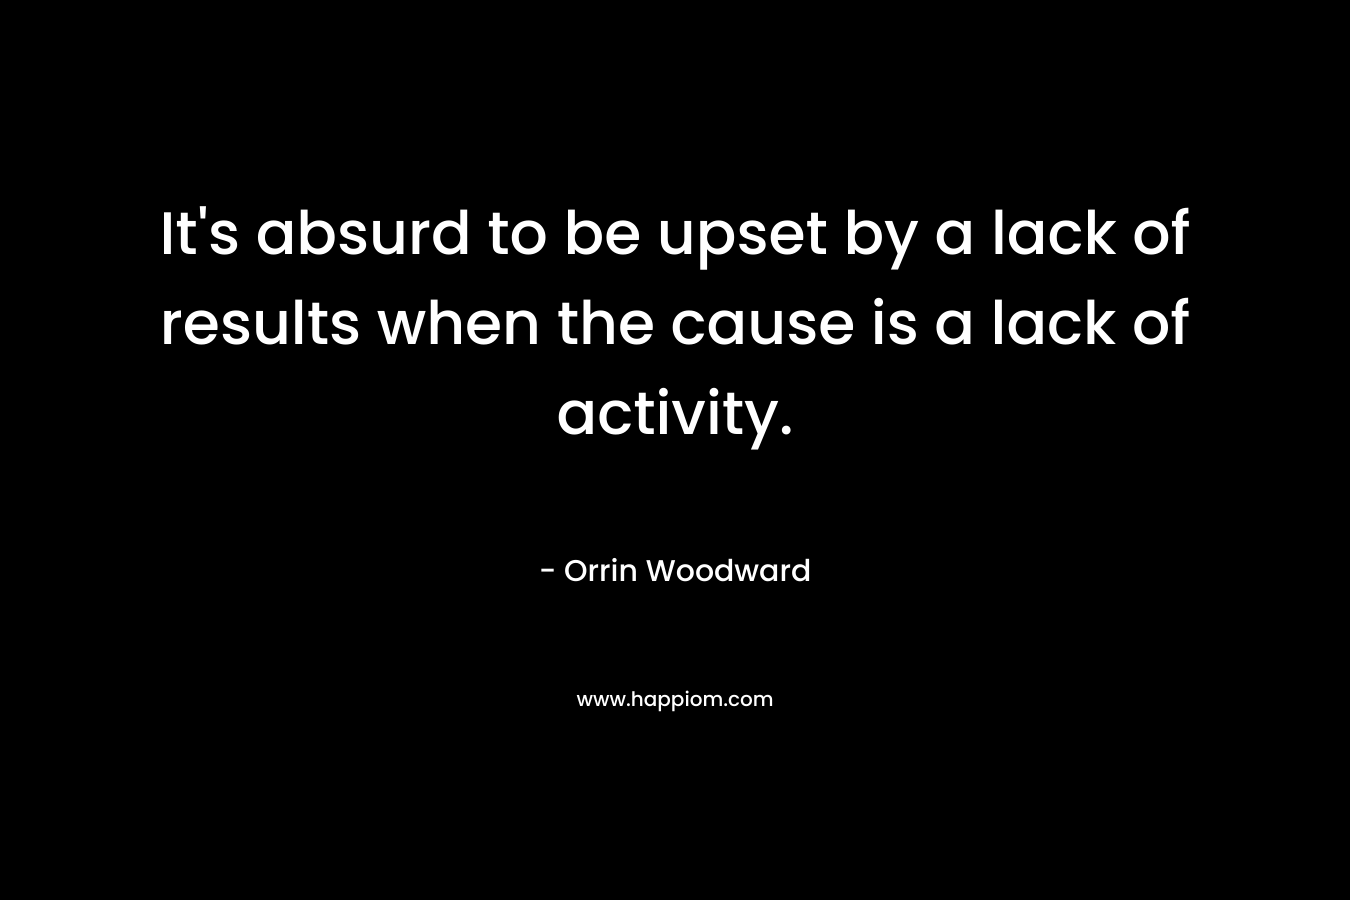 It’s absurd to be upset by a lack of results when the cause is a lack of activity. – Orrin Woodward